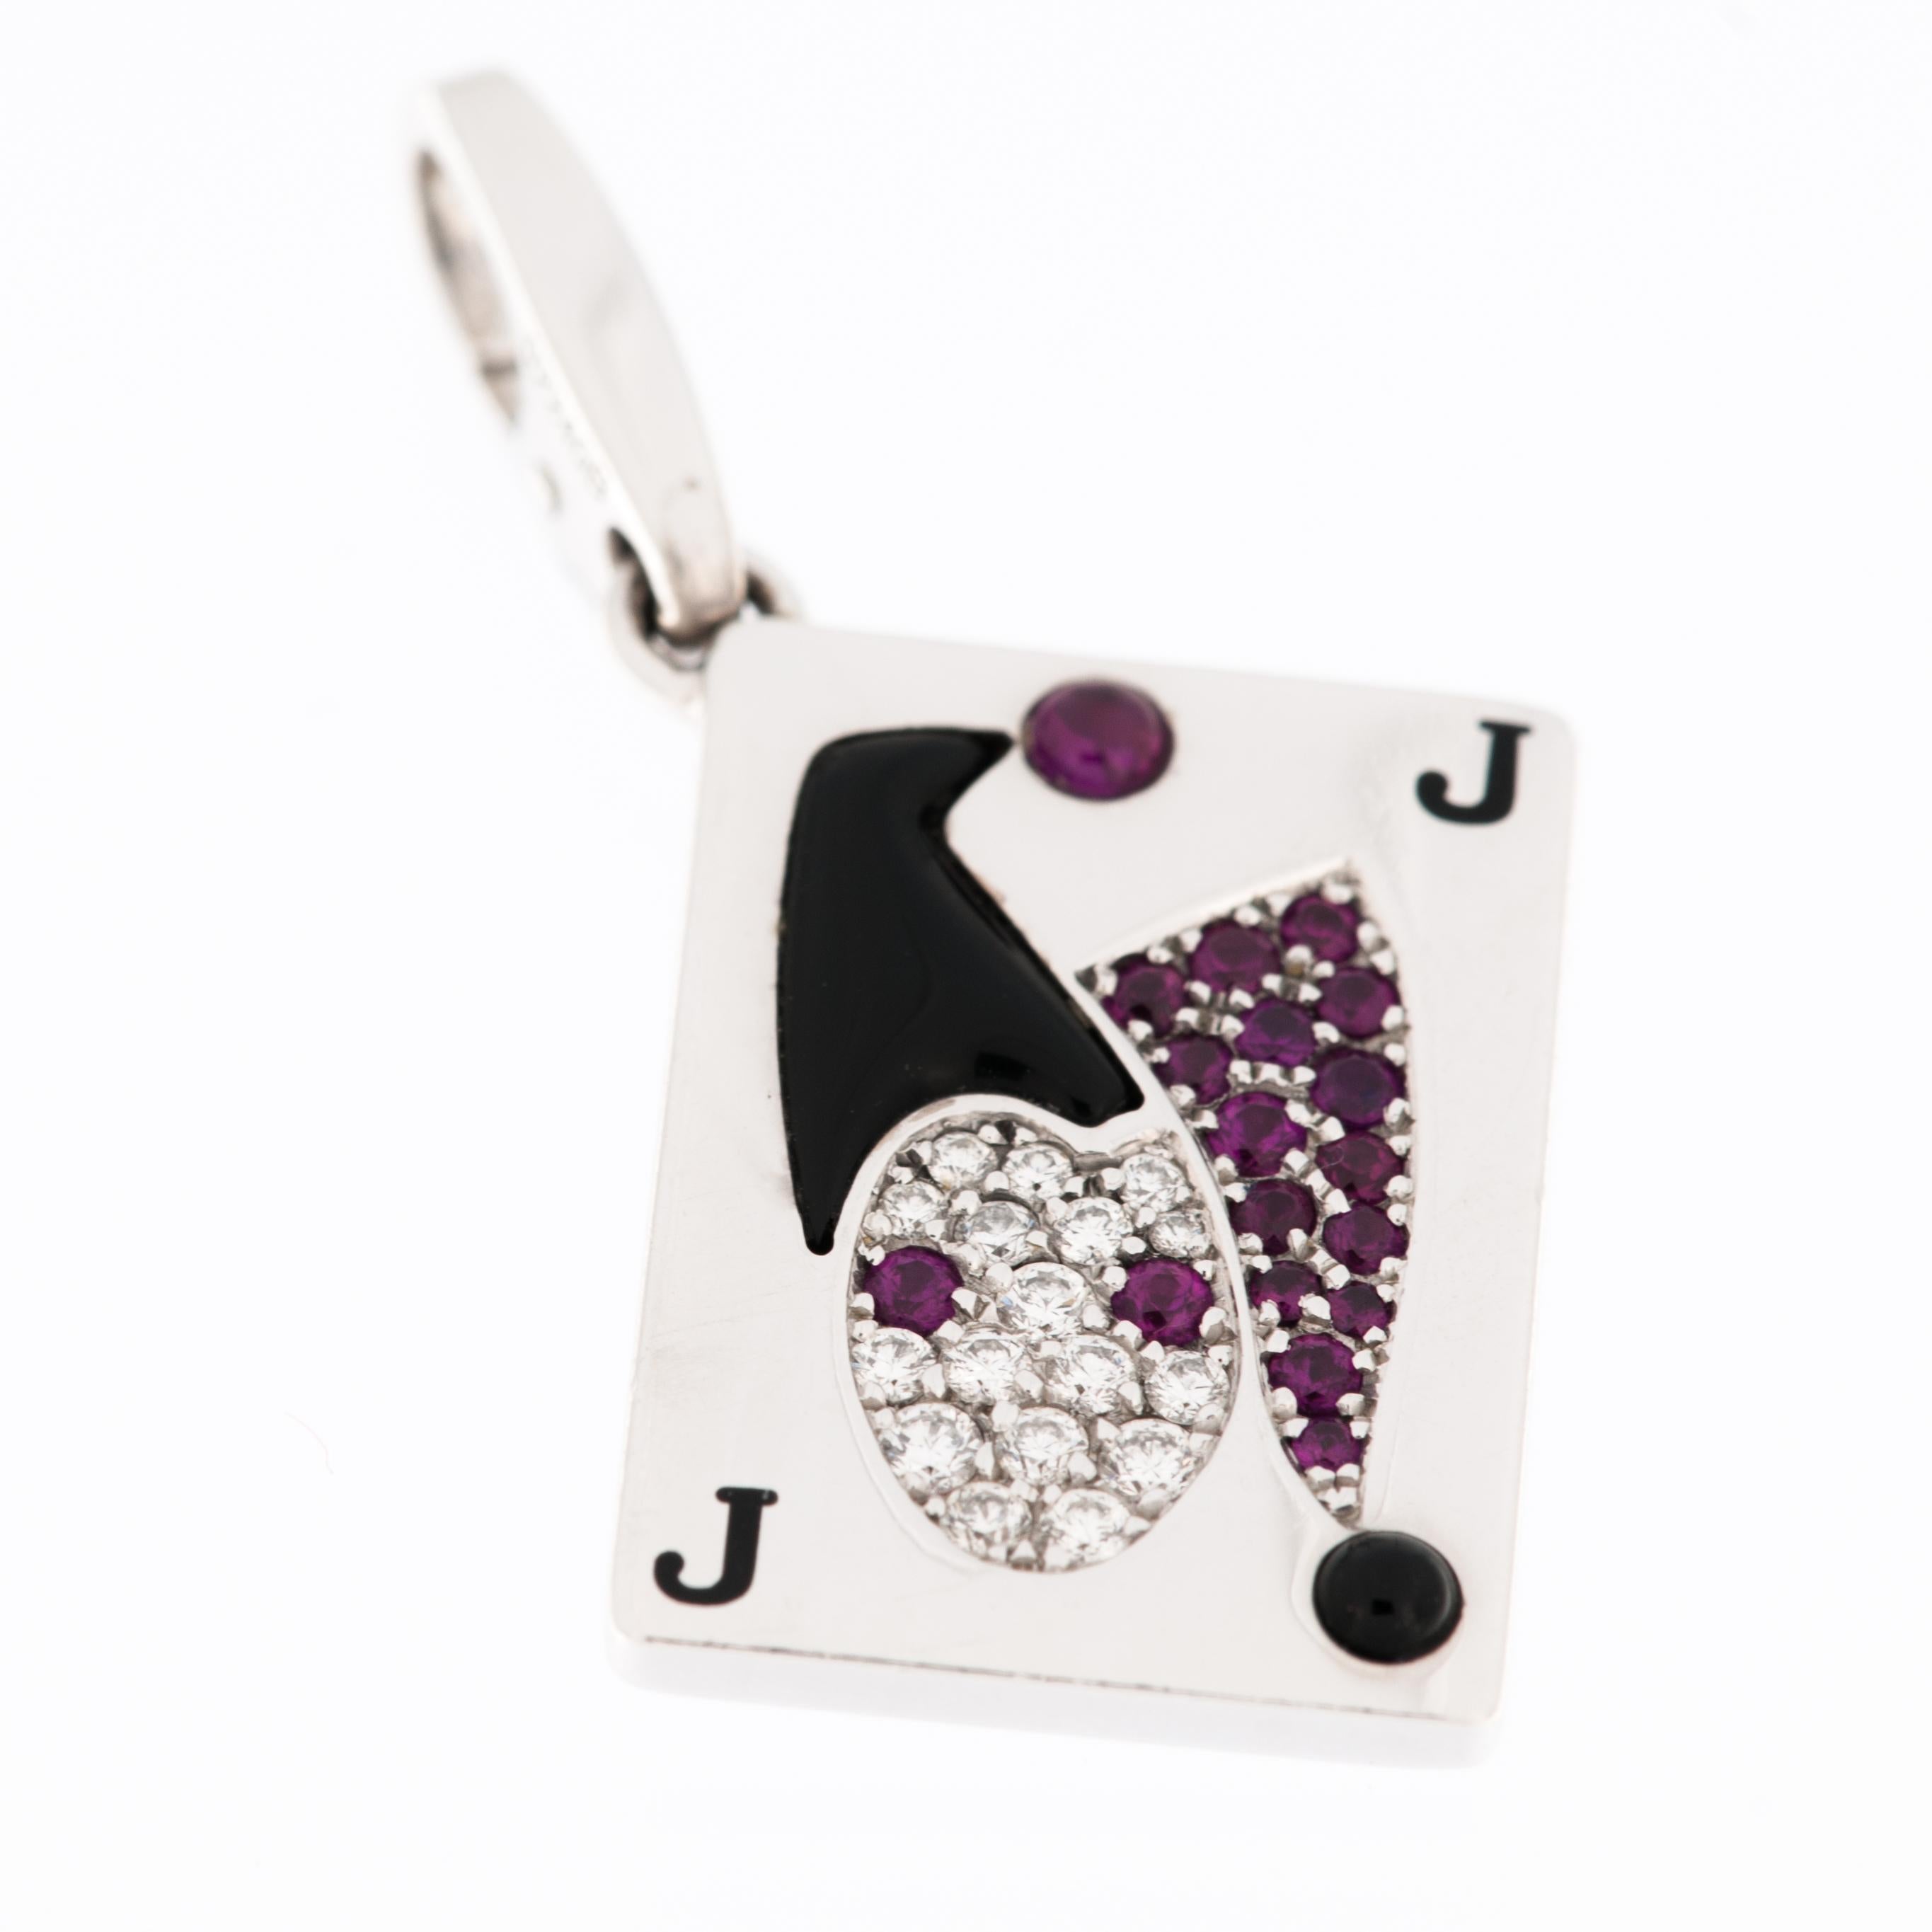 The Limited Edition Joker Playing Card Cartier Charm is a unique piece of jewelry, blending the world of luxury with a touch of whimsy. Crafted by Cartier, renowned for its exquisite designs and attention to detail, this charm is likely to be a